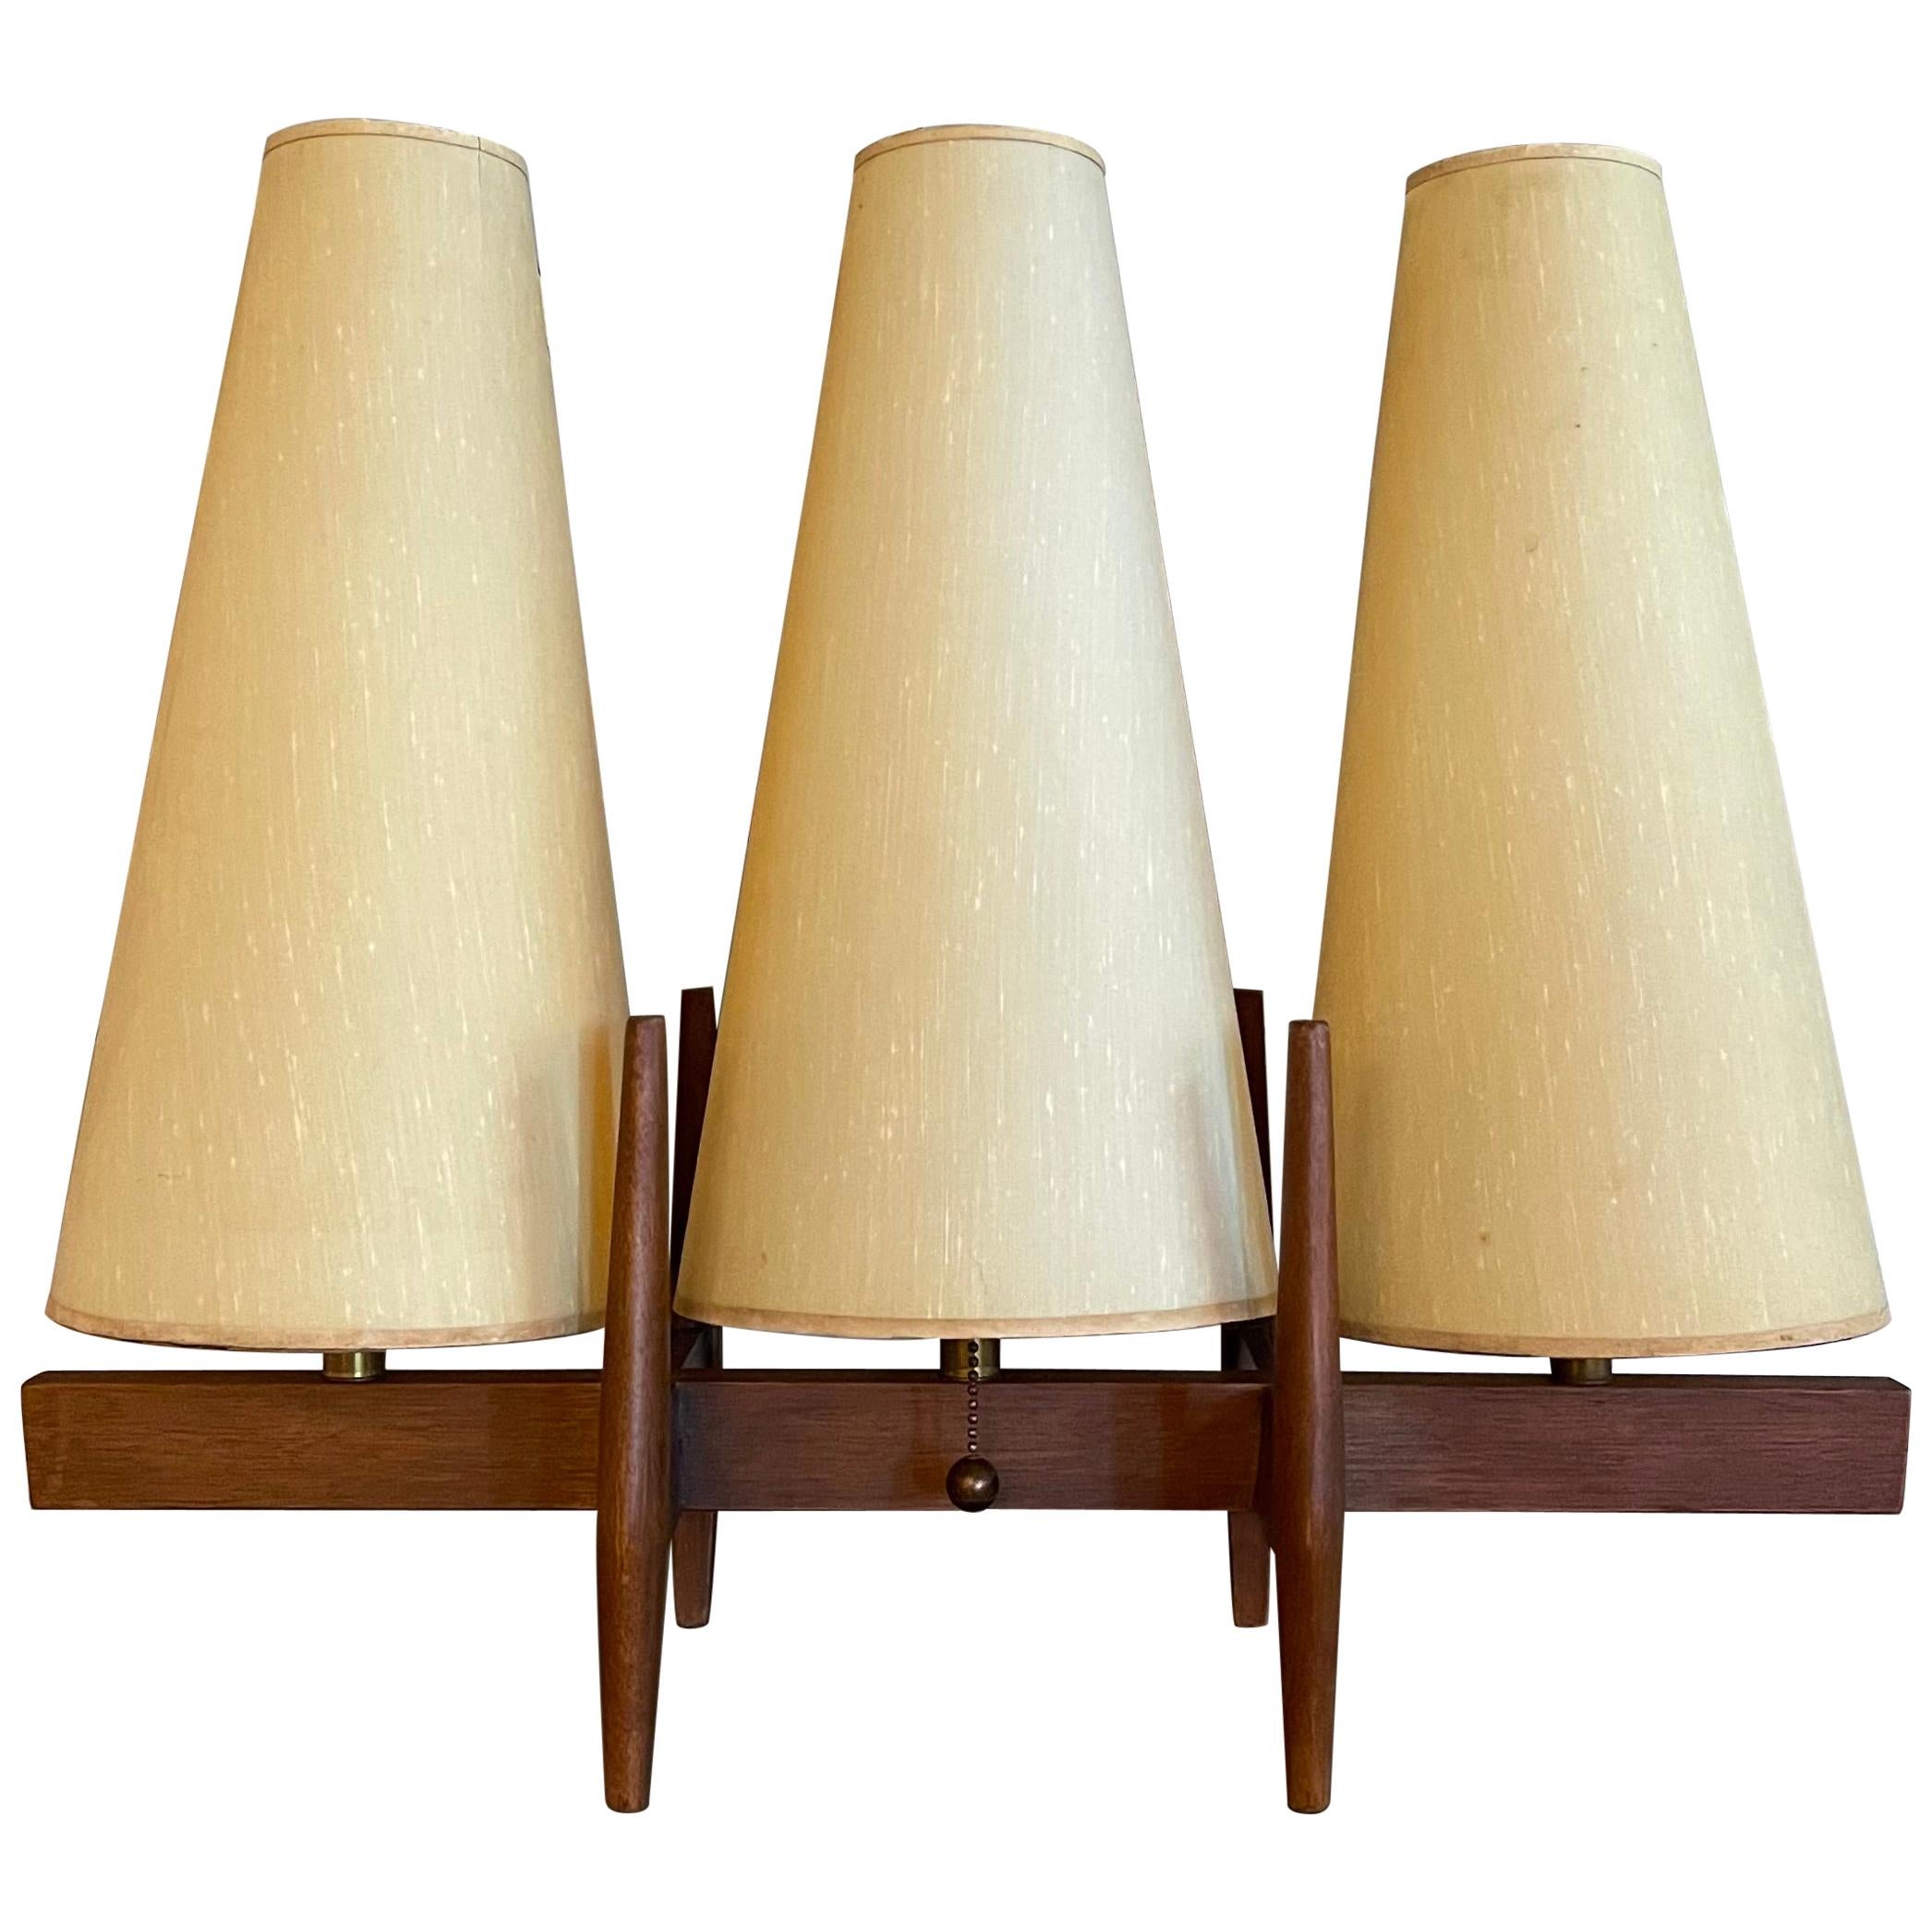 Mid-Century Modern Three Shade Table Lamp by John Keal For Modeline